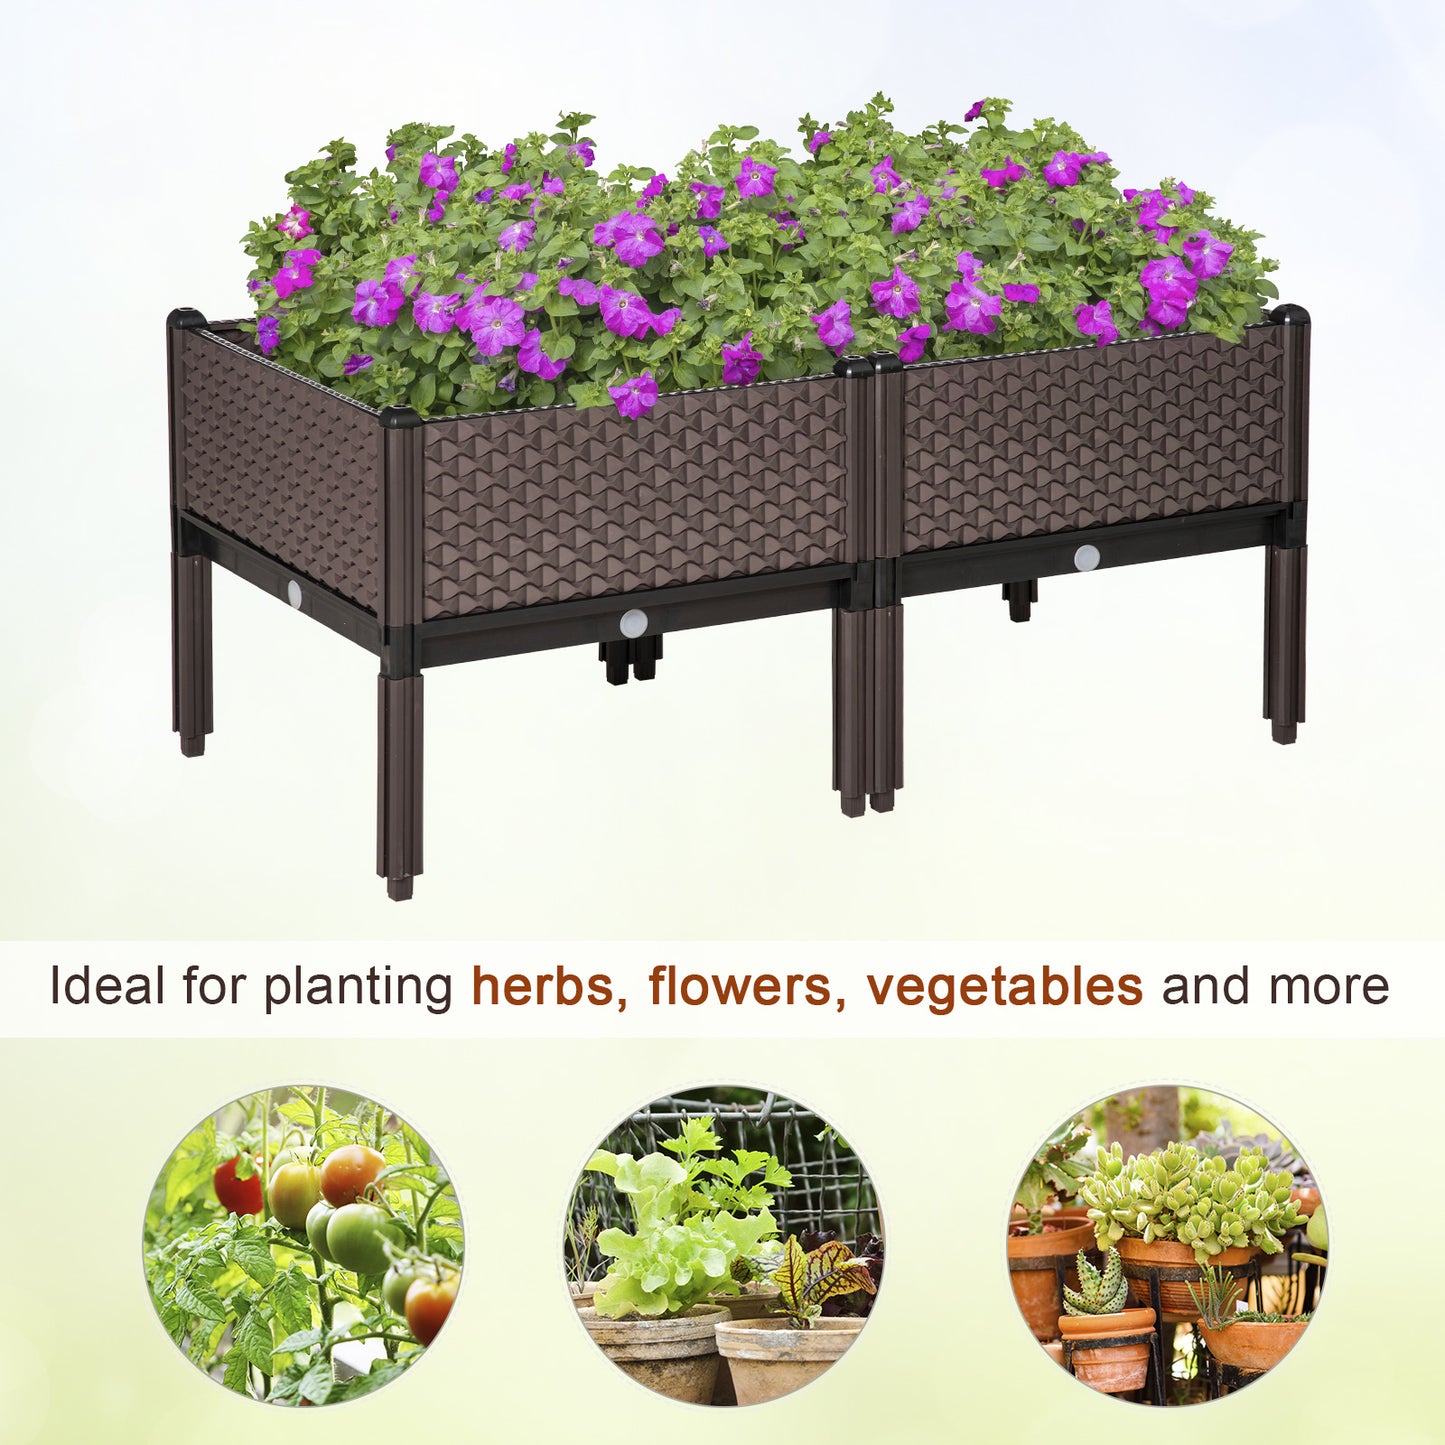 Outsunny Set of 2 Garden Raised Bed, Elevated Planter Box, Flower Vegetables Planting Container with Self-Watering Design and Drainage Holes for Flower,